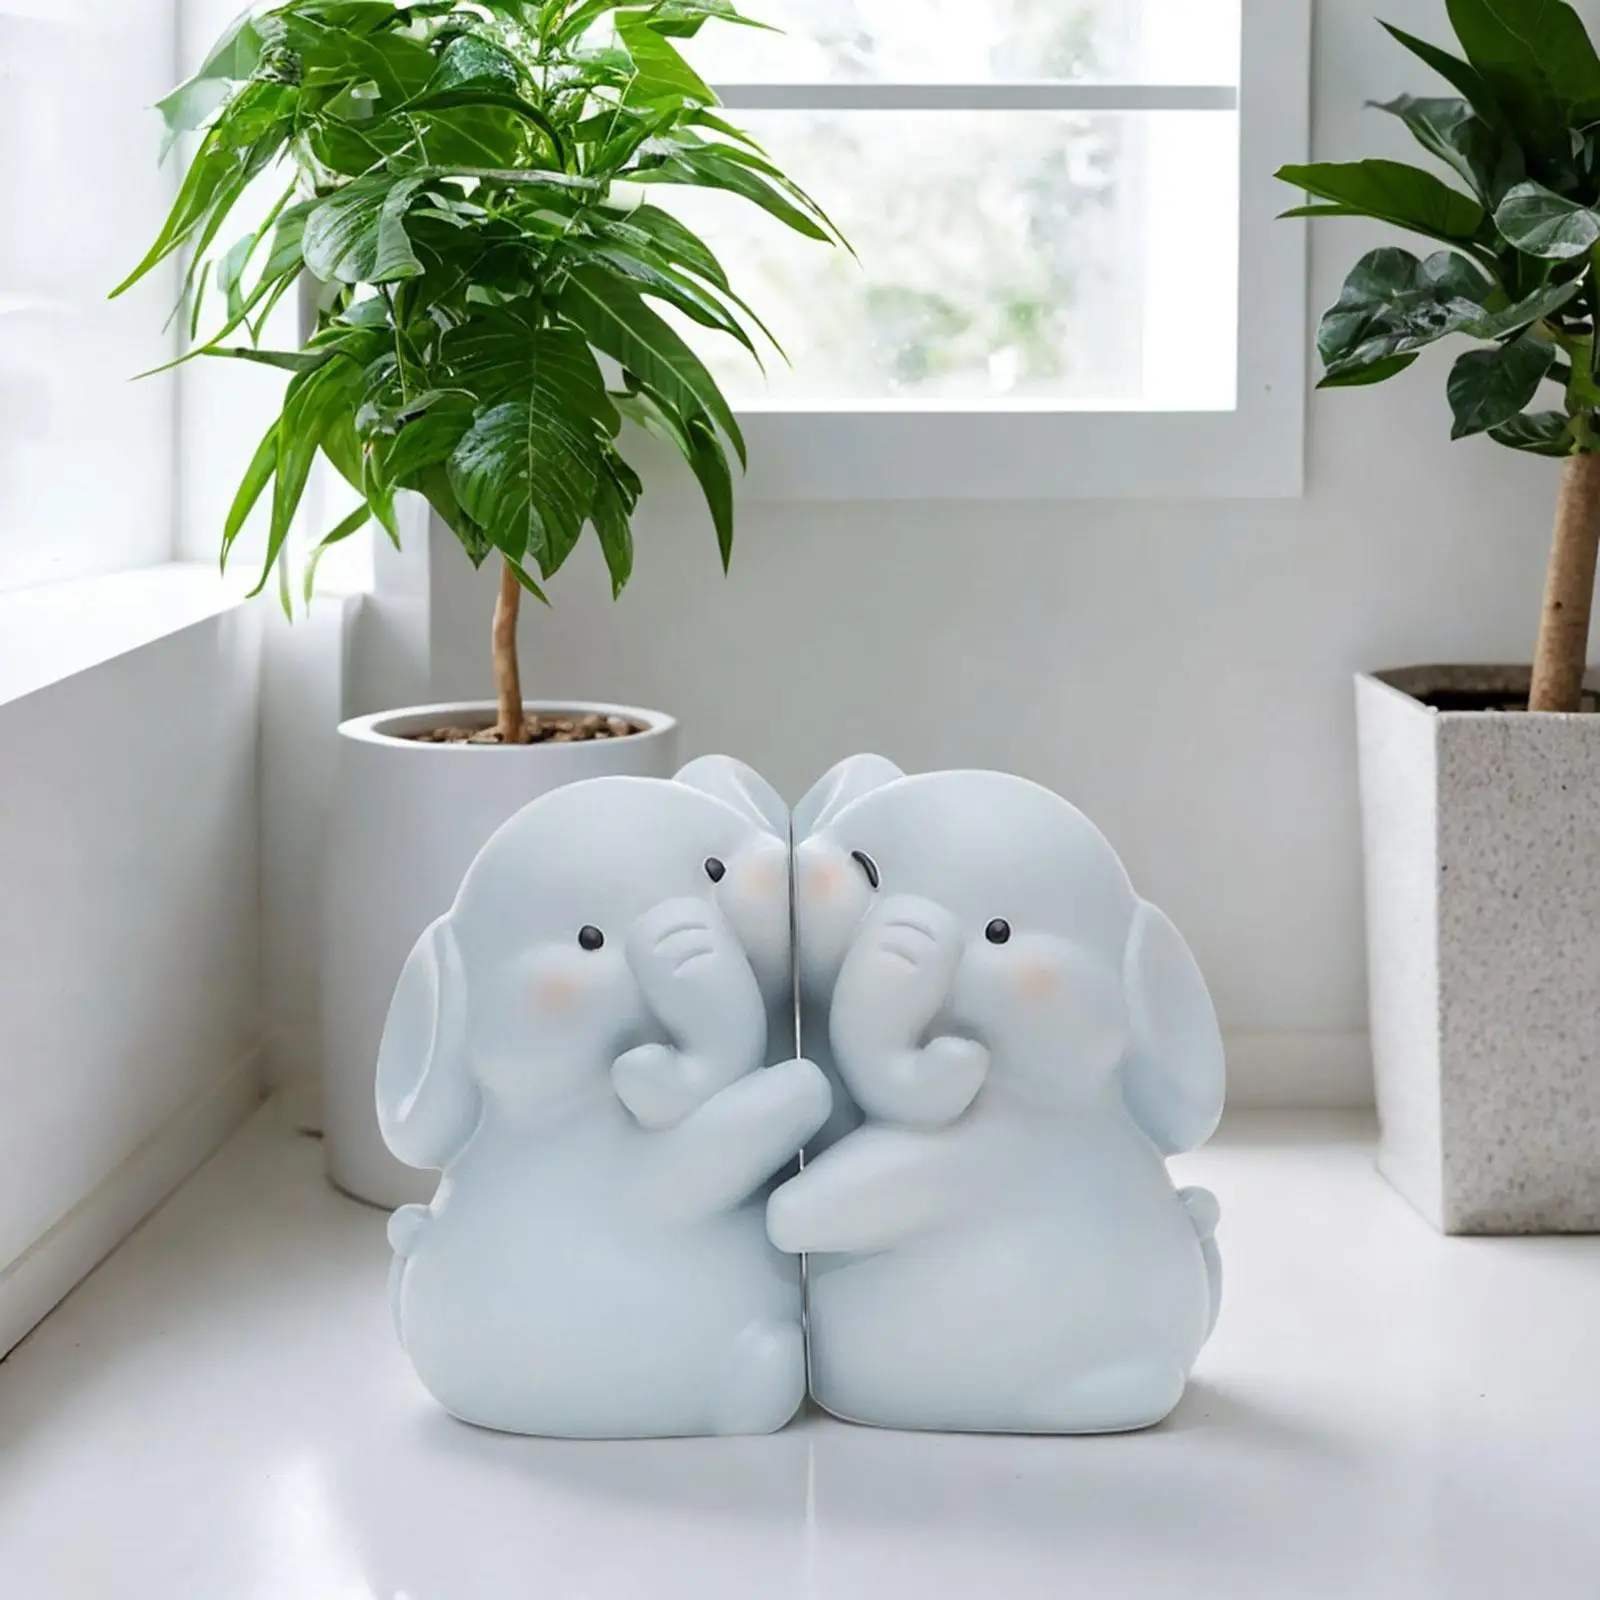 Cute Animal Decorative Bookends Book Organizer Modern Office Desk Accessories Creative Gifts Resin Office Home Decor Book Holder